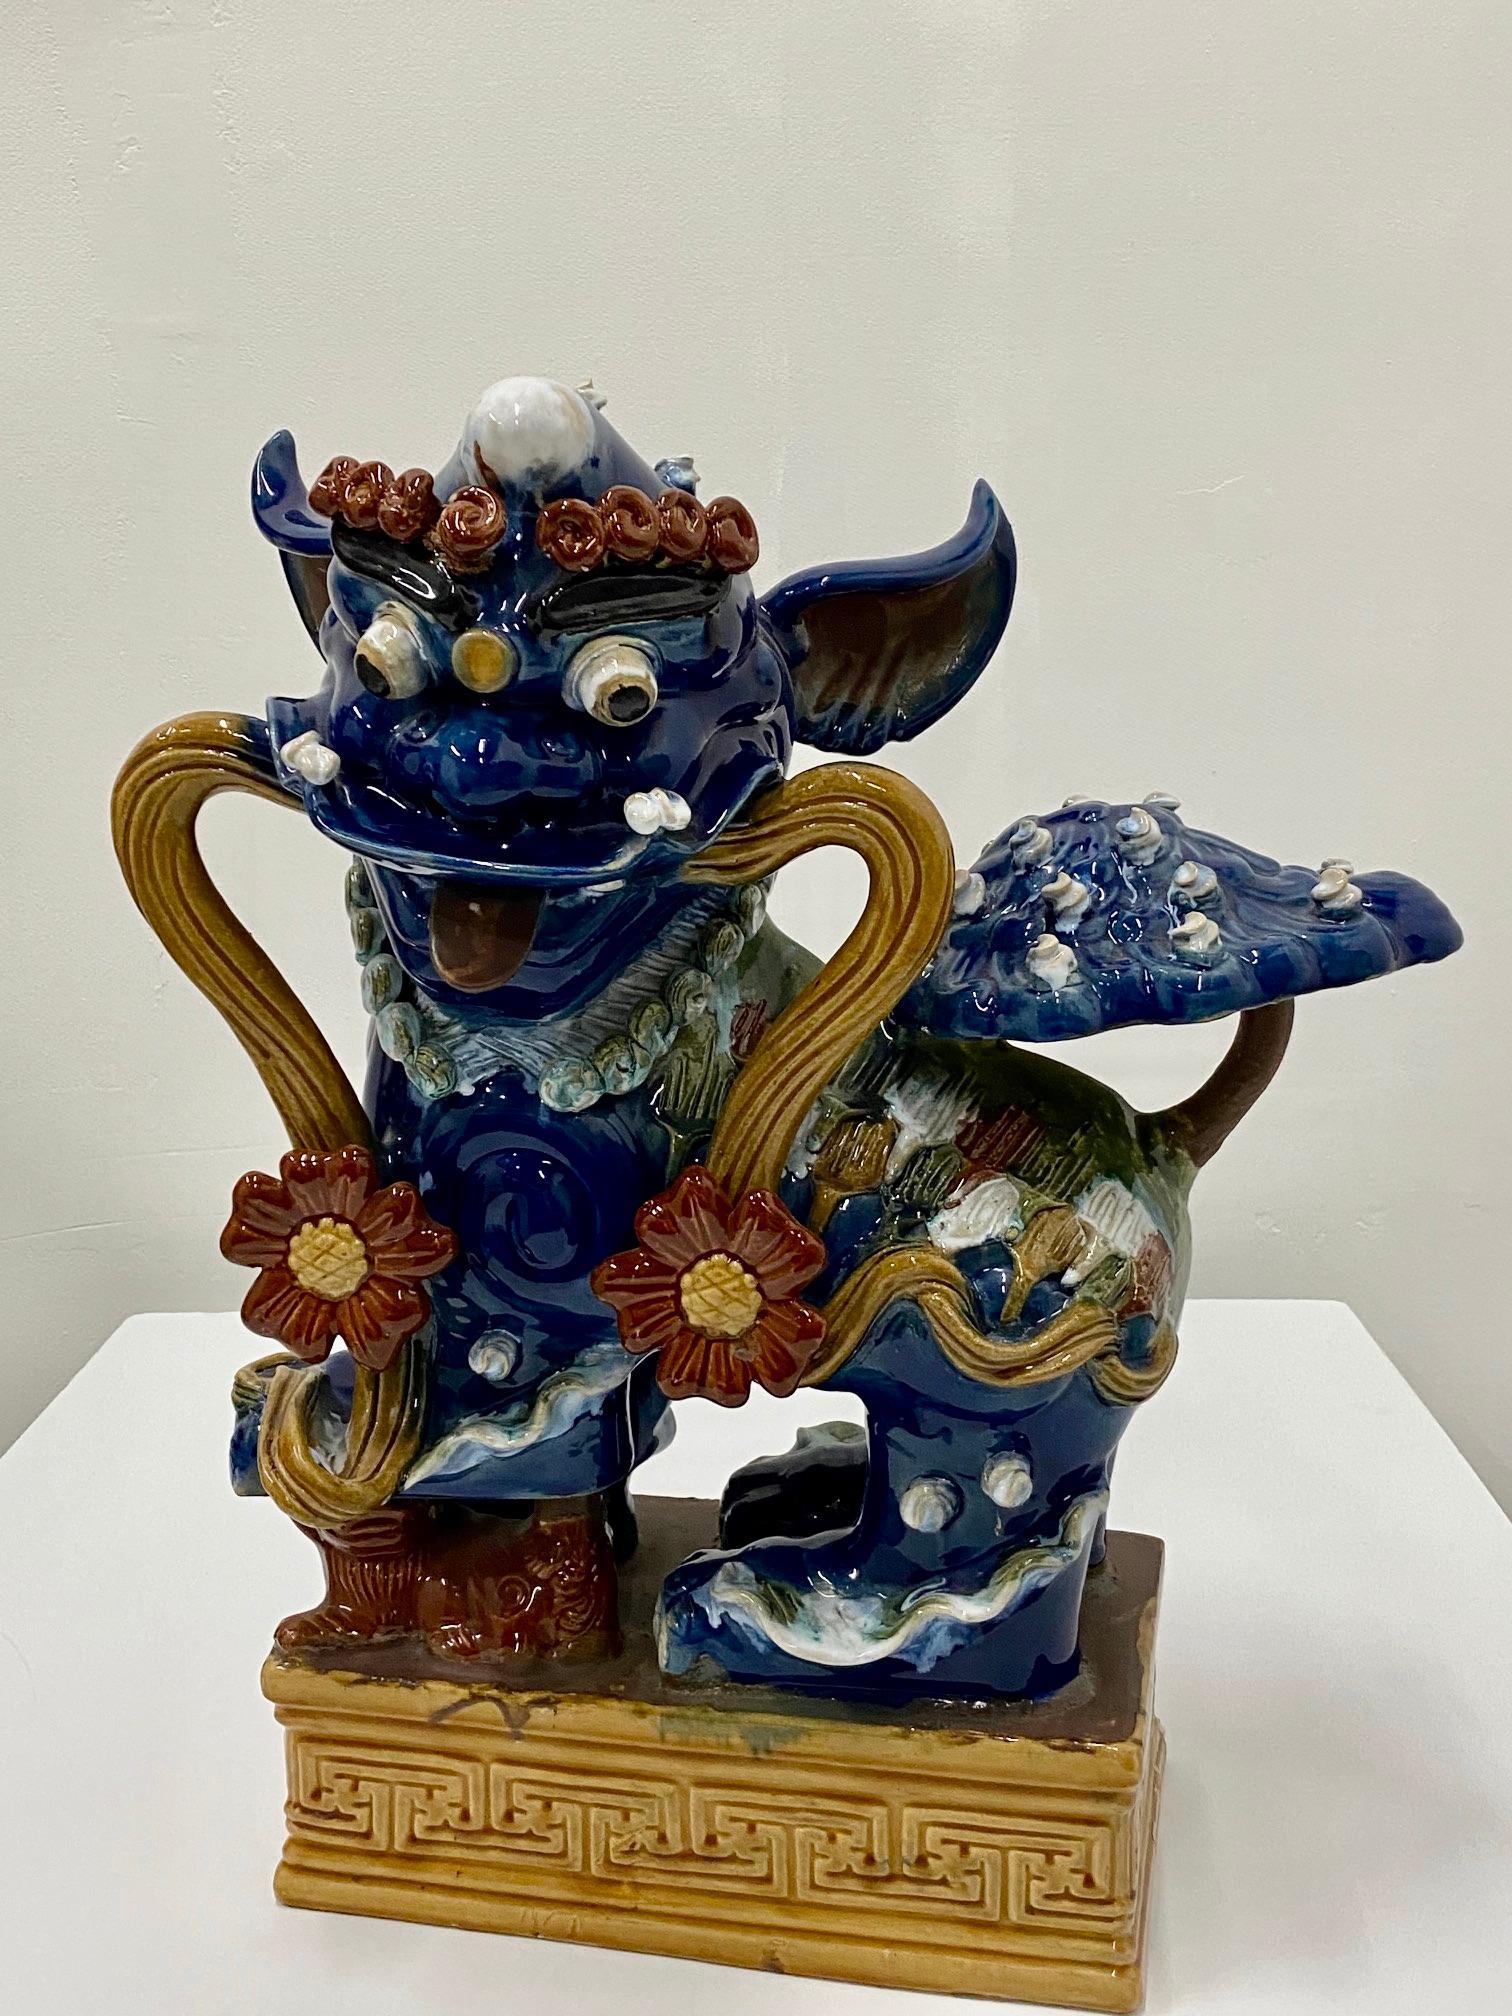 Superb pair of Chinese foo dogs with great colors and meticulous detail.